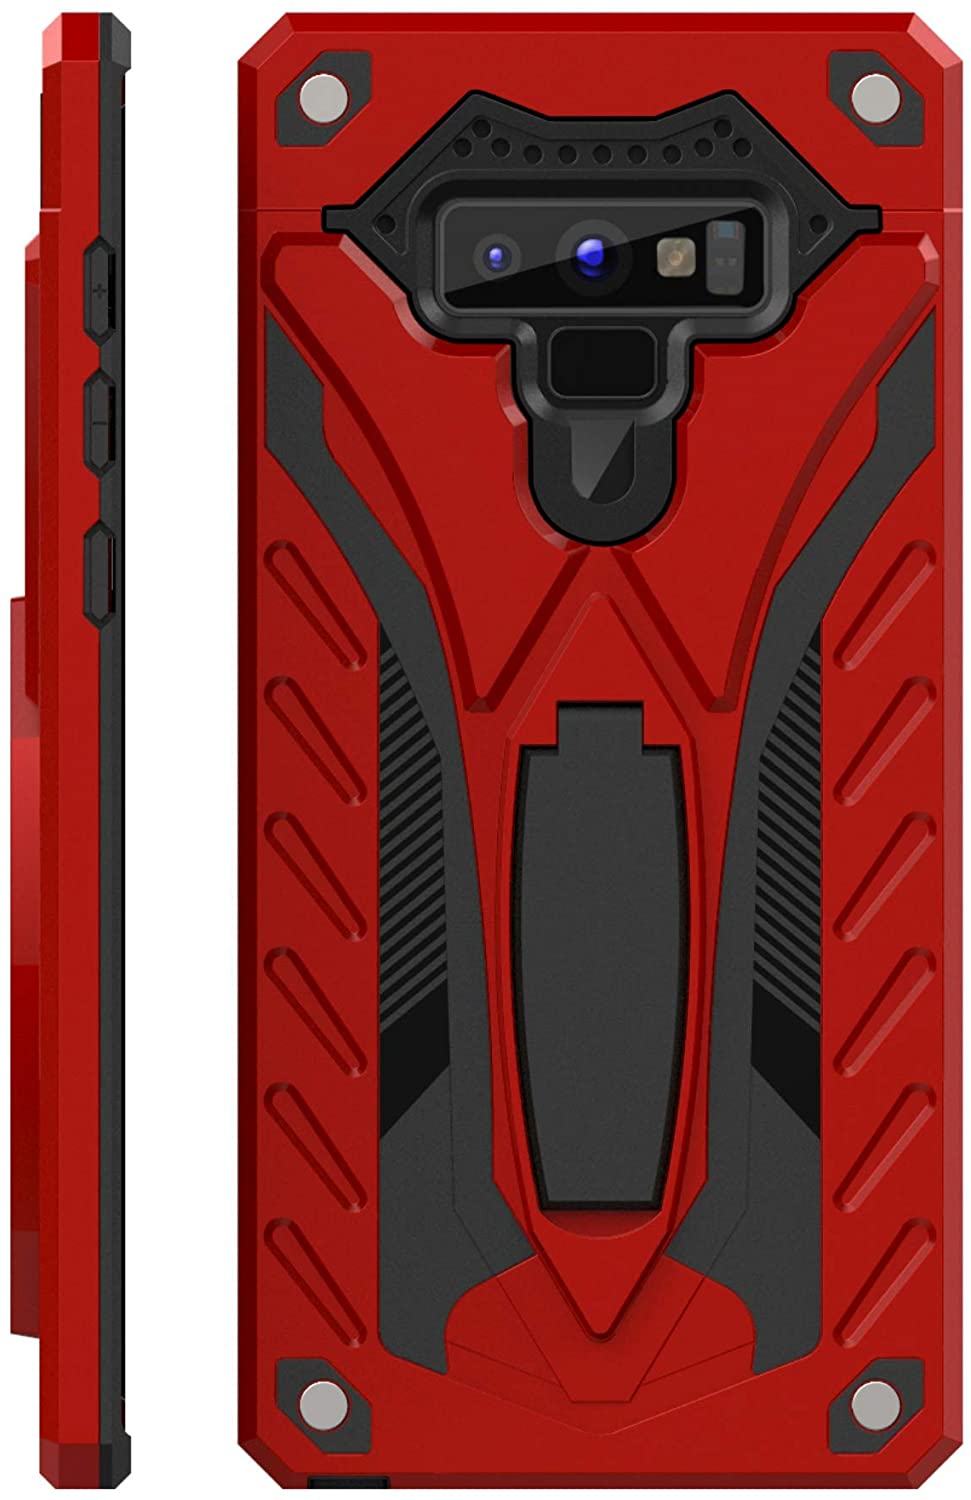 Samsung Galaxy Note 9 Hard Case with Kickstand Red